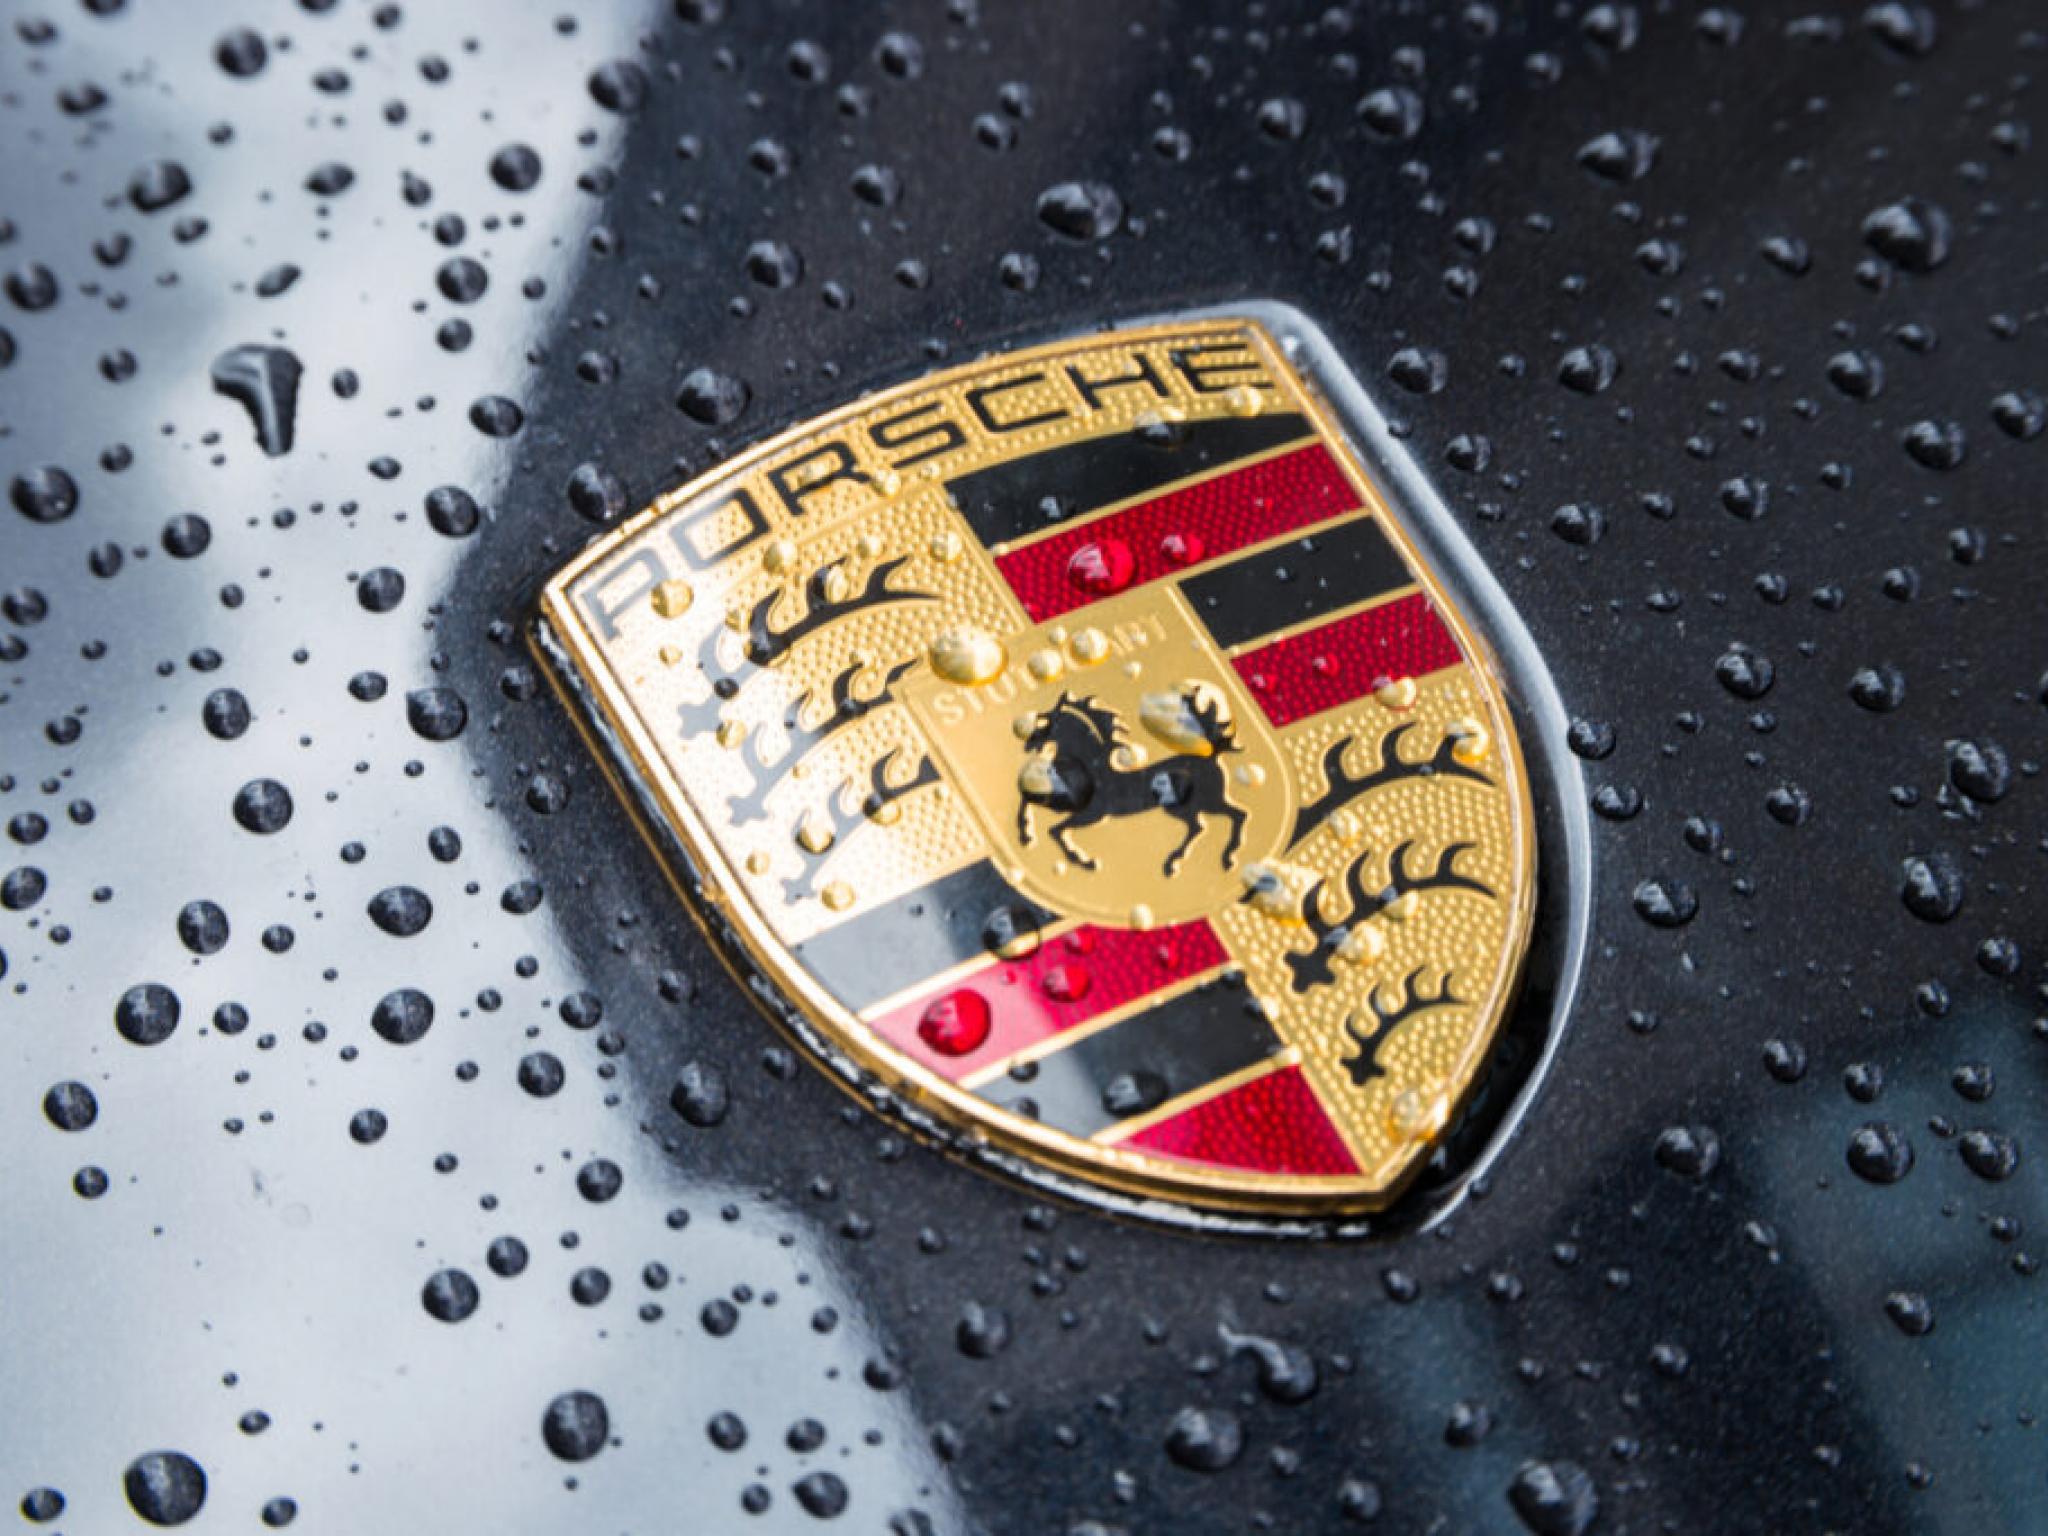  porsche-recommends-ev-users-to-use-low-voltage-charging-cables-as-it-recalls-40k-vehicles-citing-fire-risks 